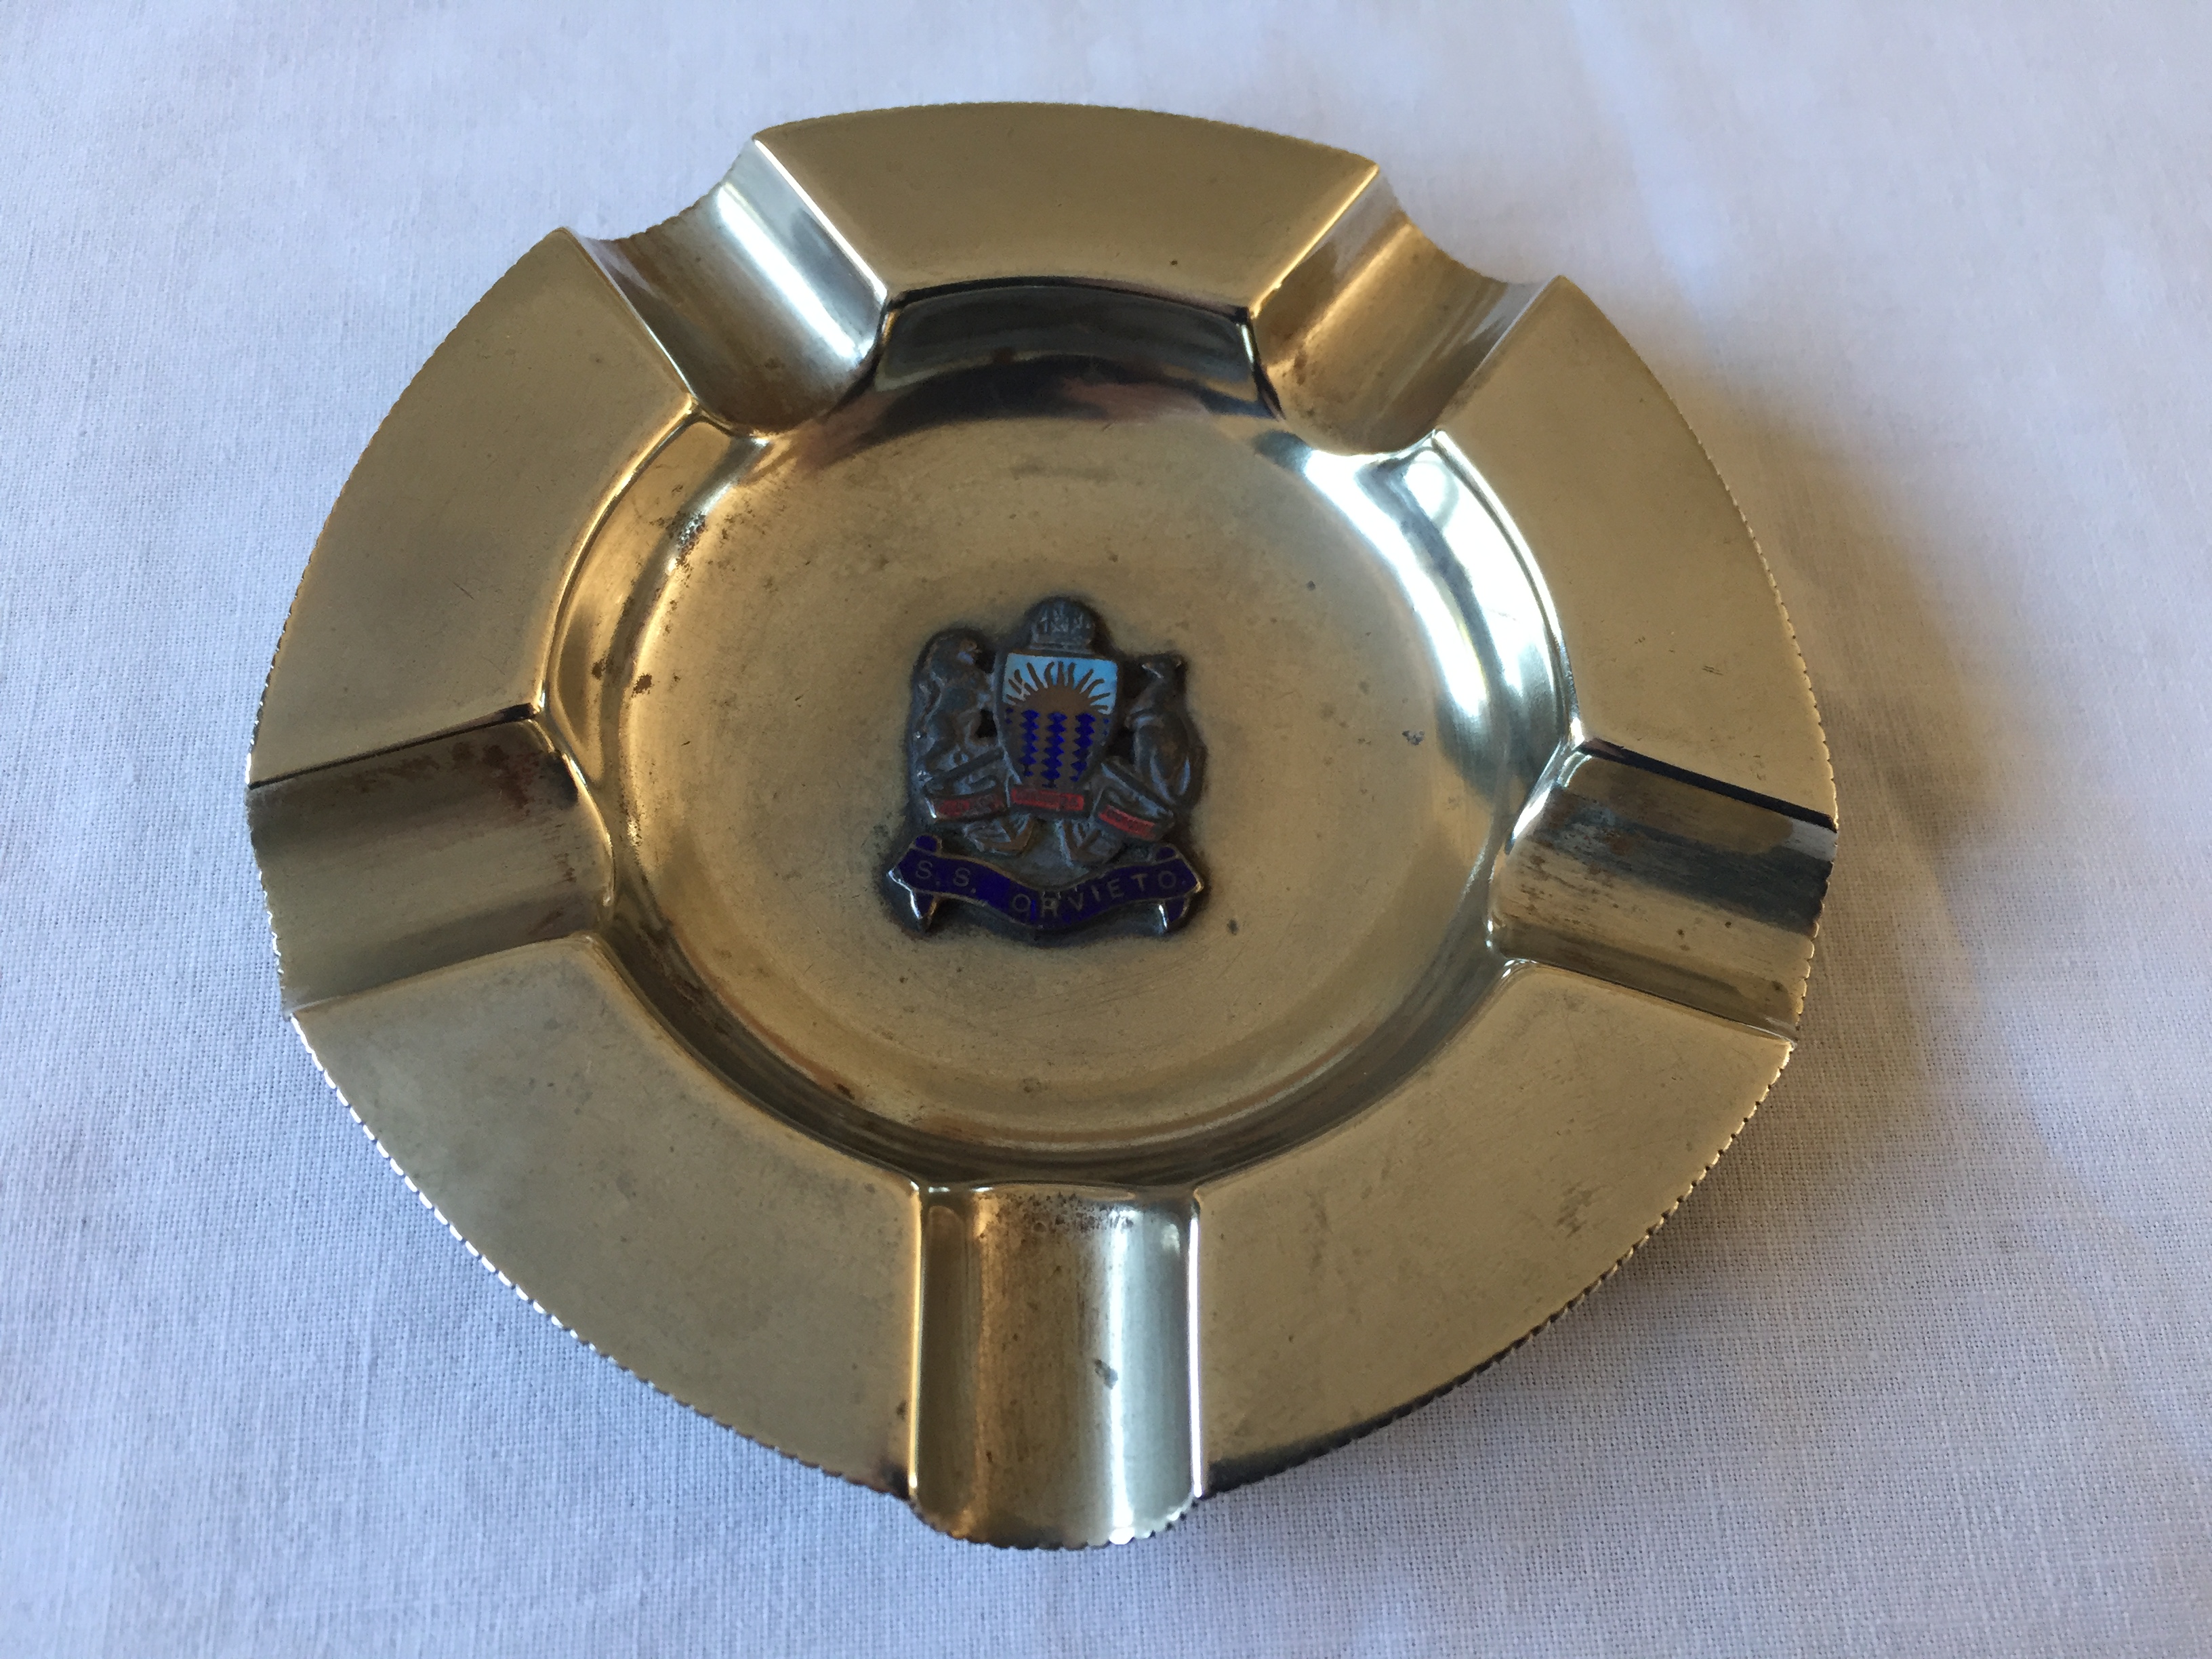 VERY RARE TO FIND EARLY SOUVENIR ASHTRAY FROM THE ORIENT LINE VESSEL THE SS ORVIETO